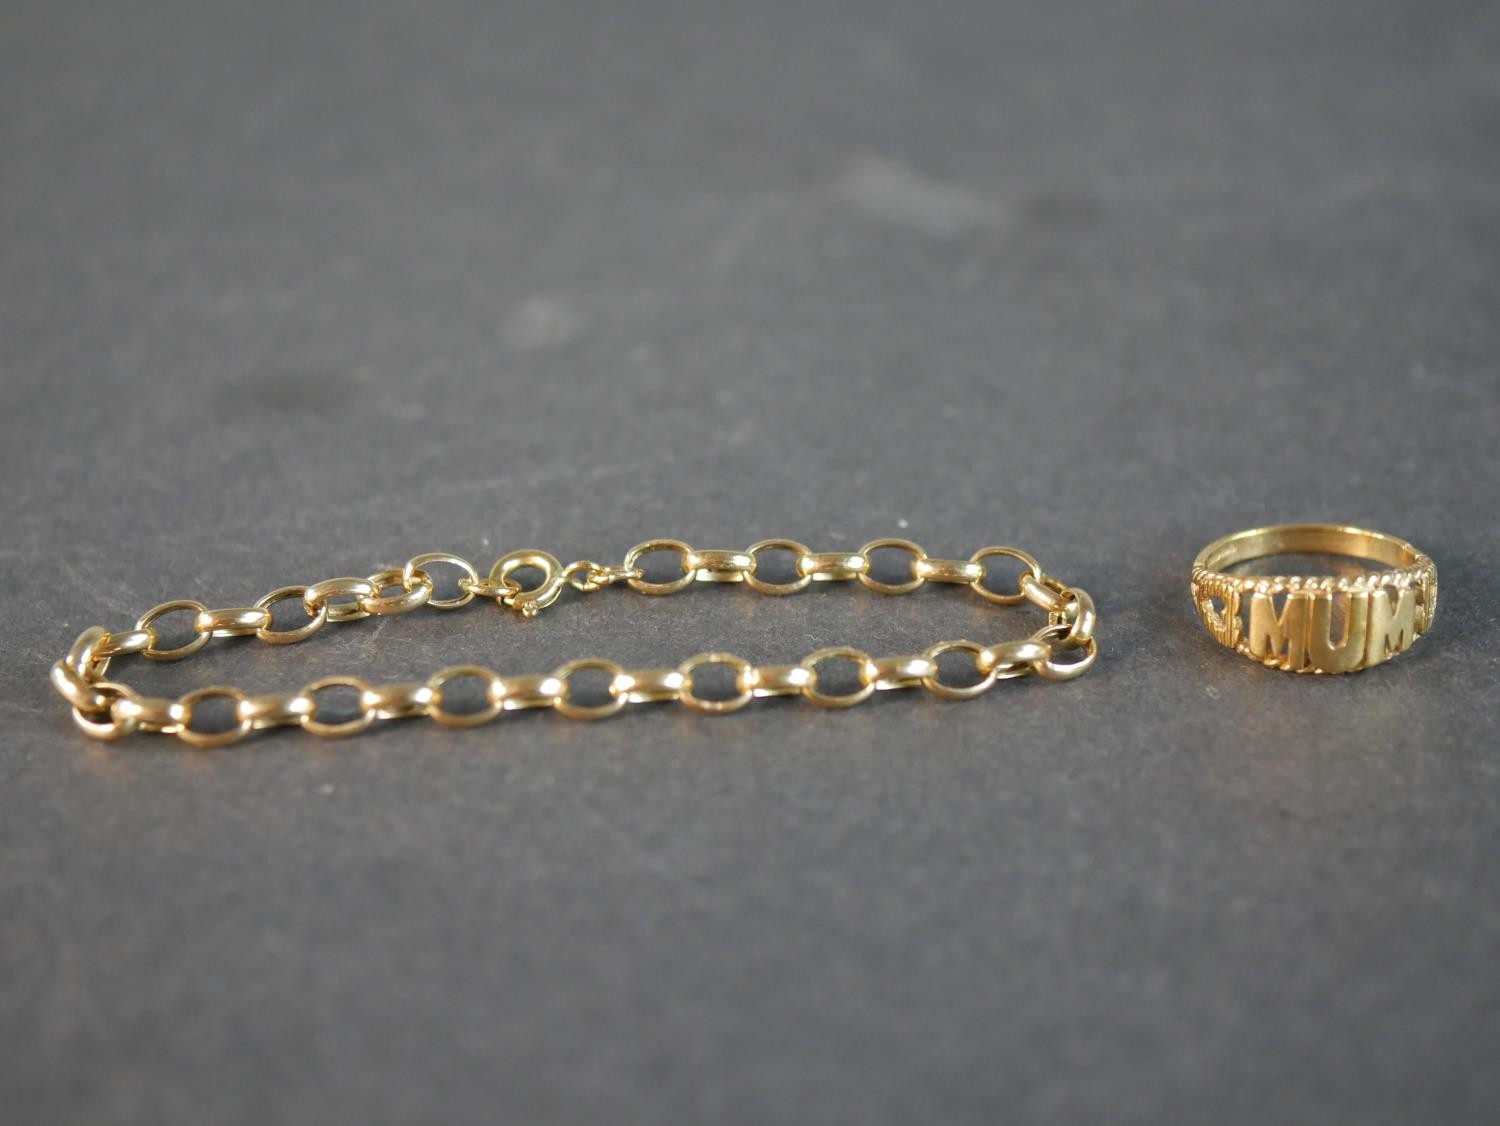 A 9ct yellow gold MUM ring along with a 9ct yellow gold oval link bracelet. Ring size 1/2. 4.23g